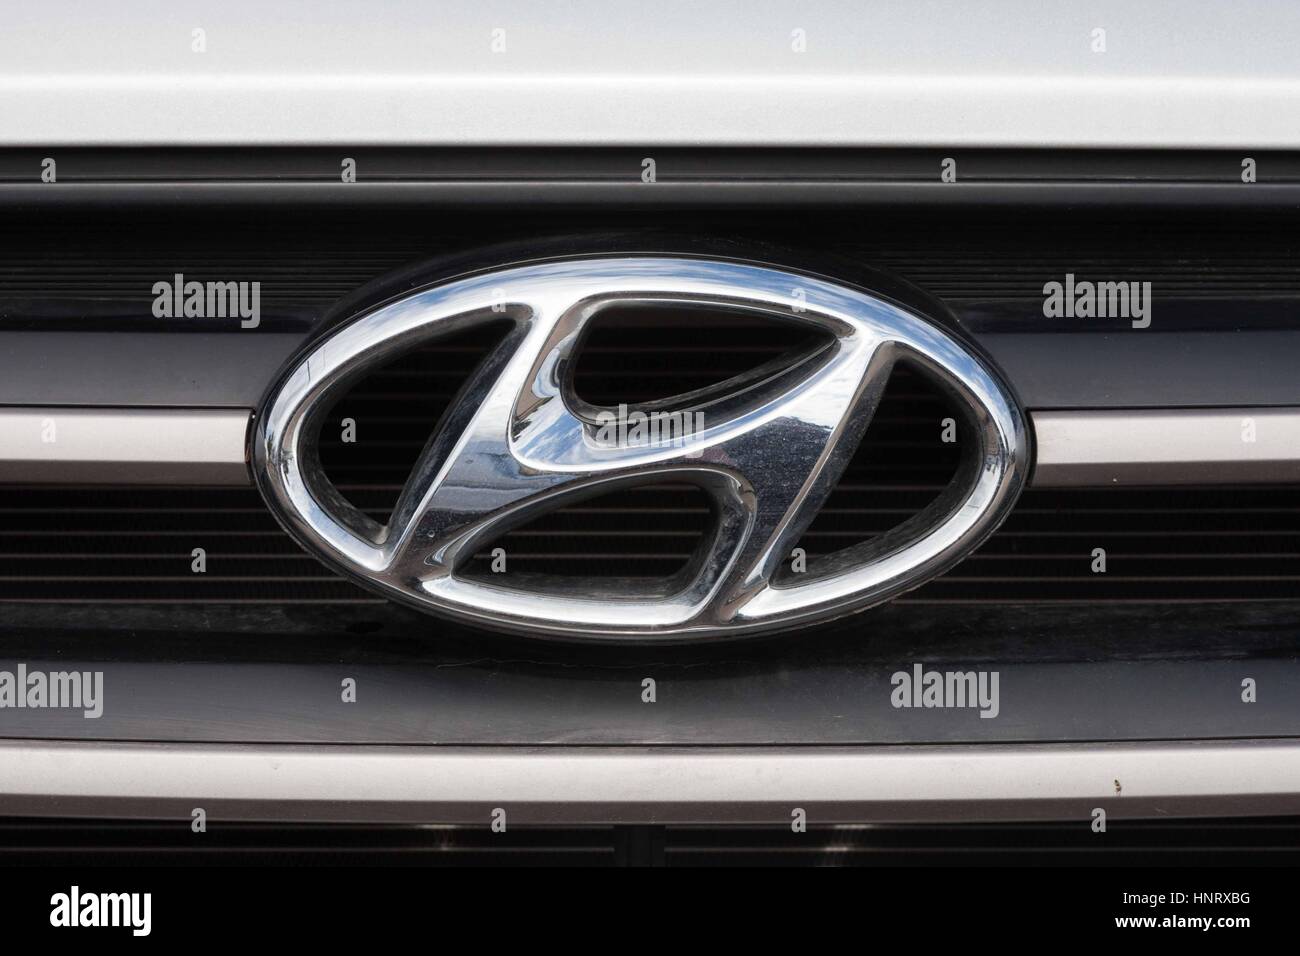 Hyundai logo on a dealership building. Hyundai is a multinational car maker headquartered in Seoul, South Korea. It was founded by Chung Ju-yung in 19 Stock Photo